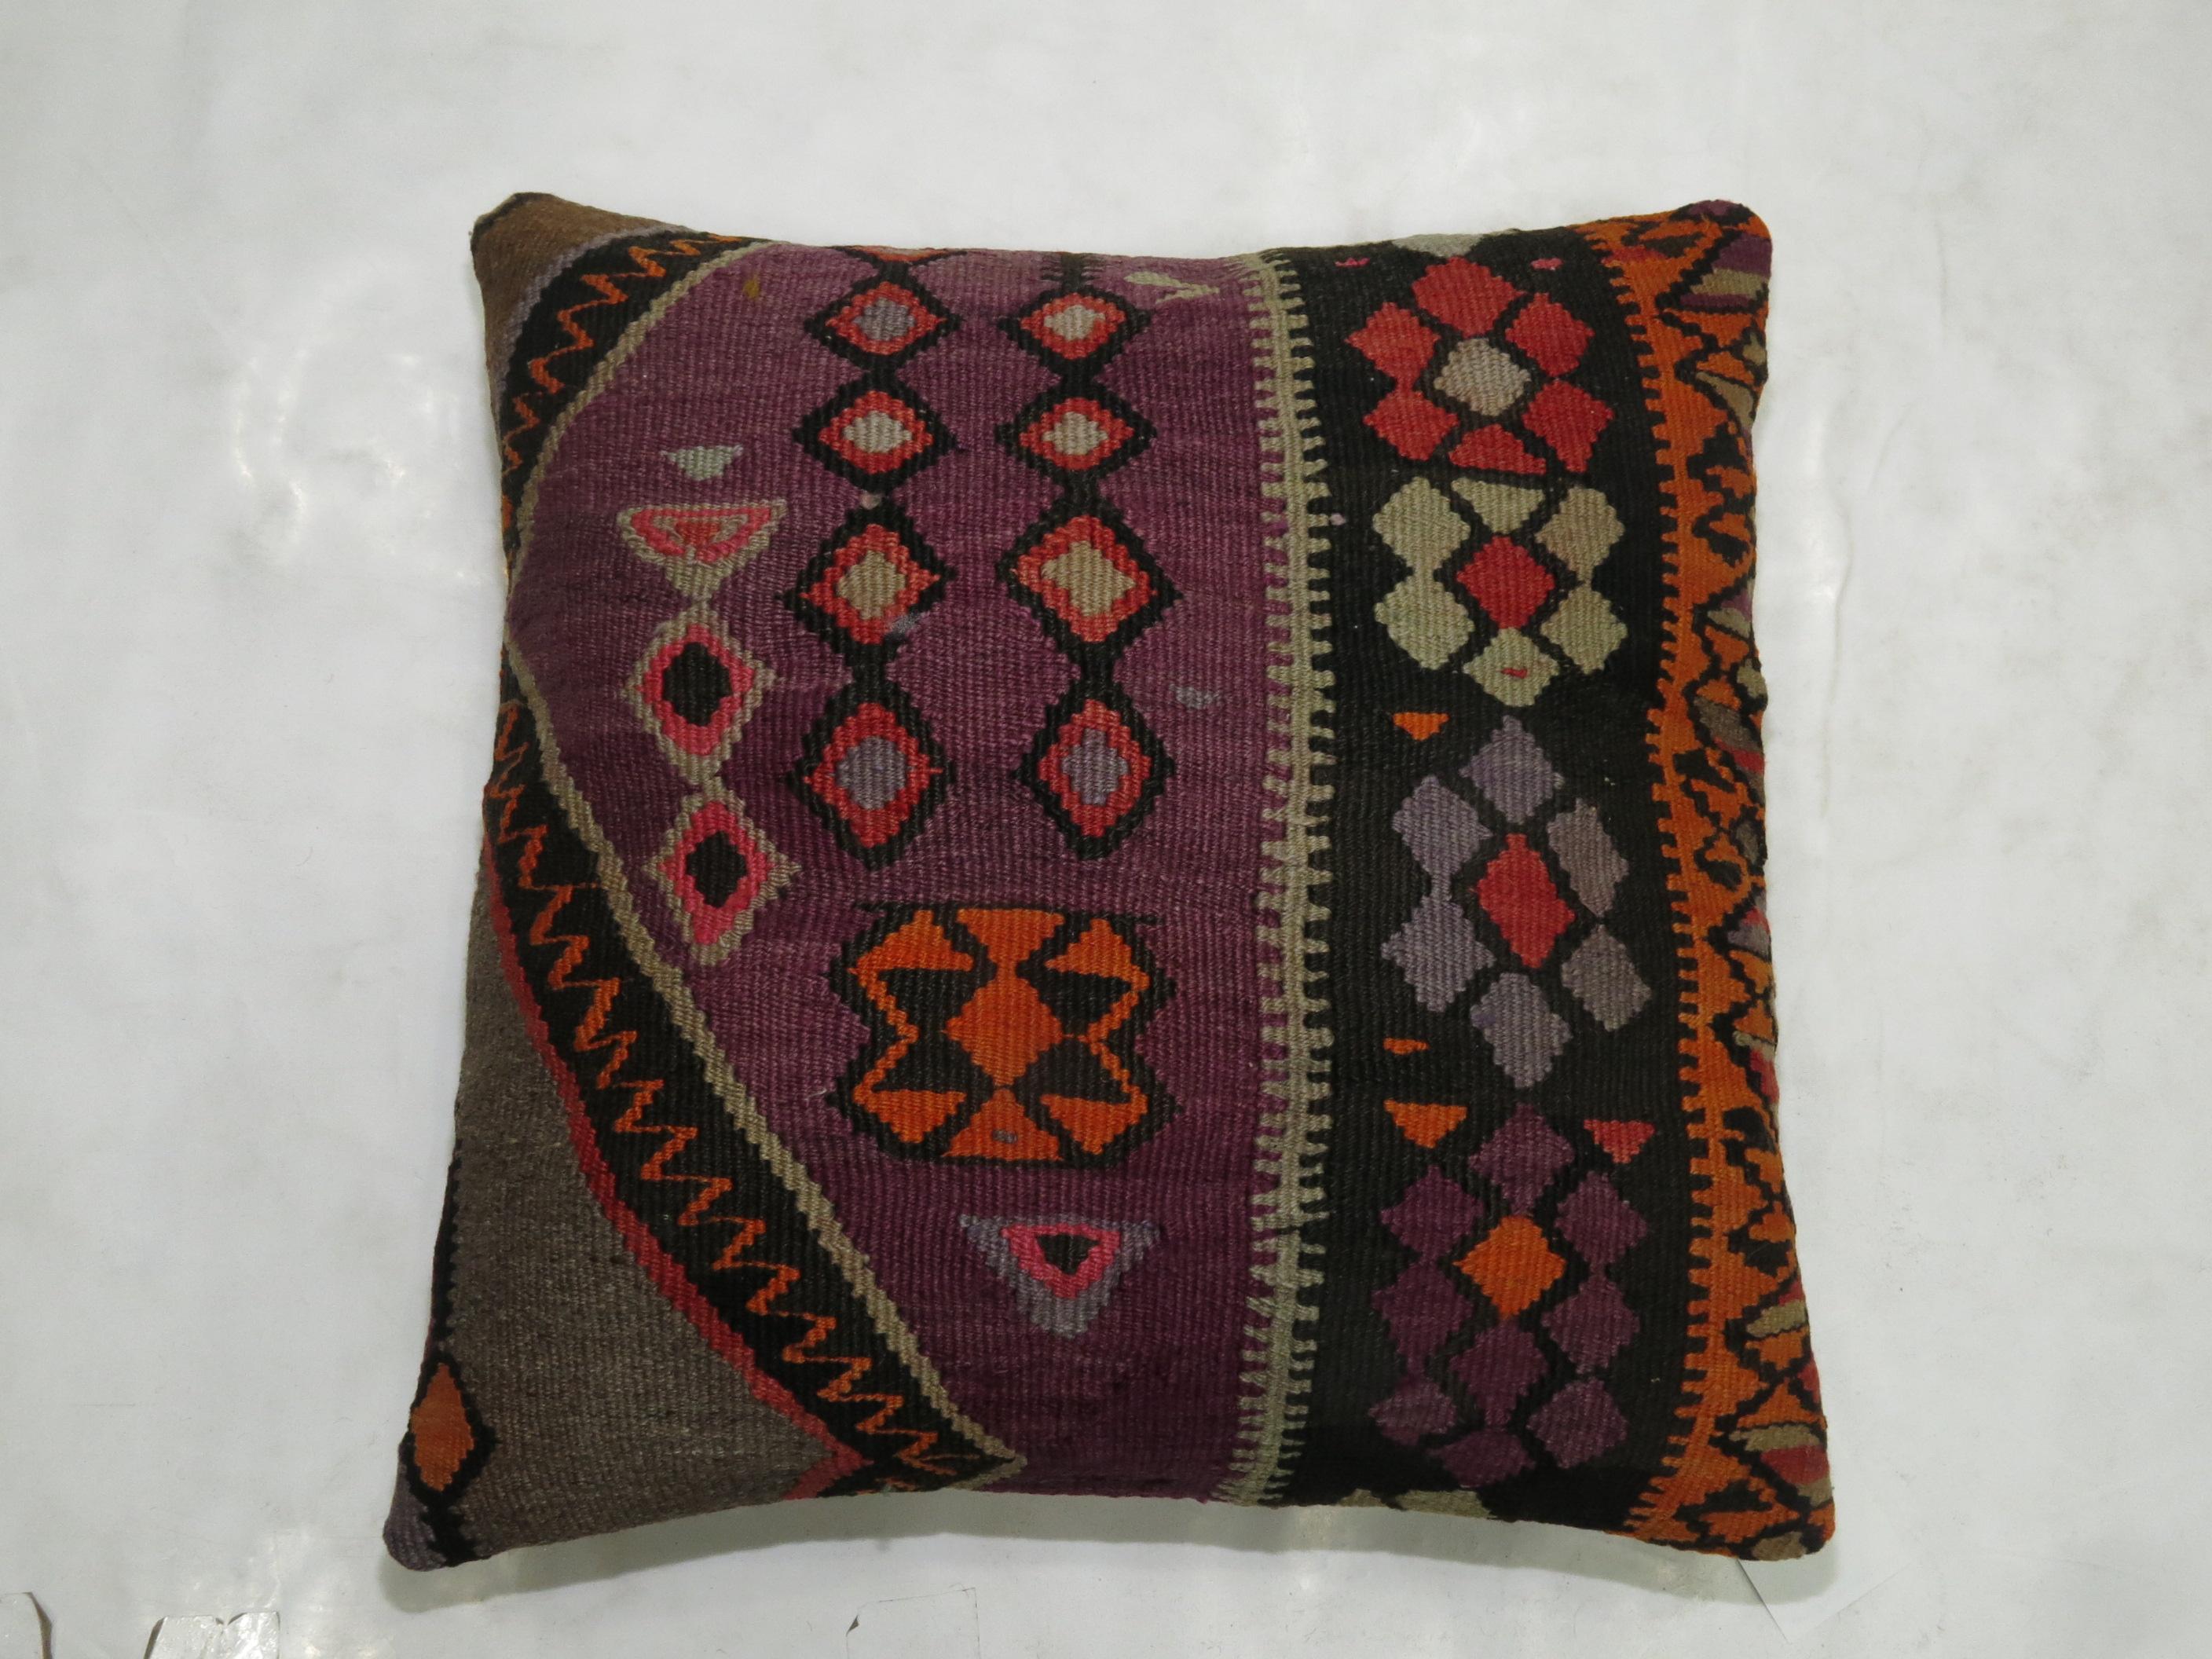 Pillow made from a Turkish Kilim In purple.

Measures: 19